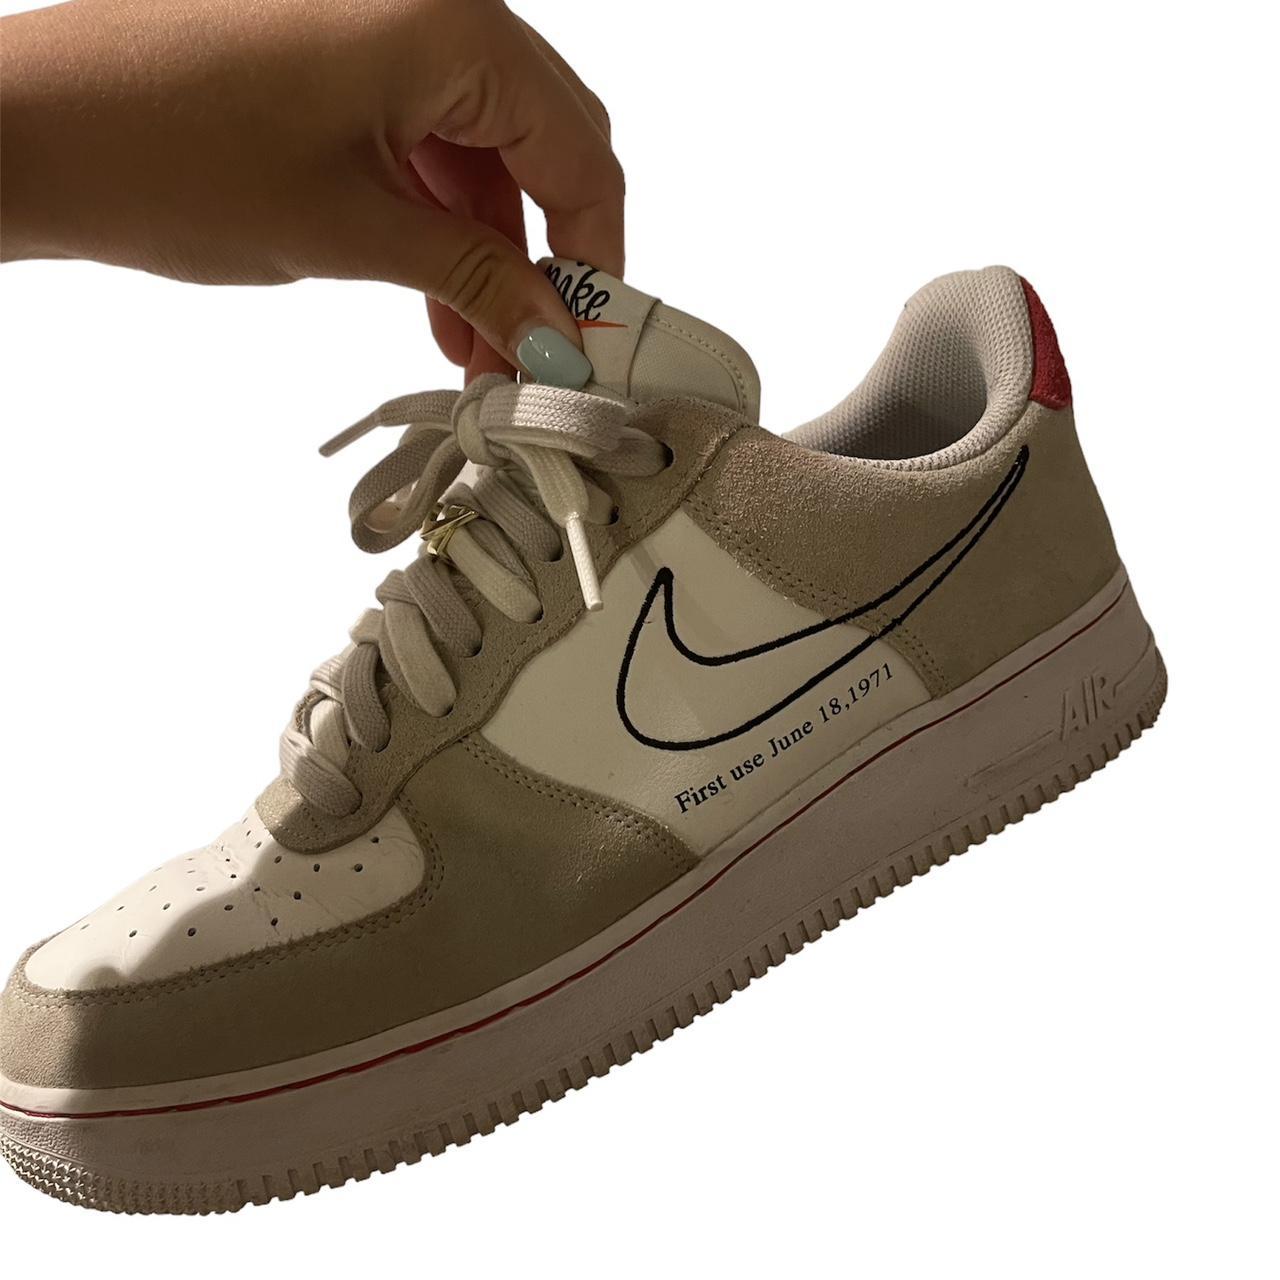 Nike Air Force 1 '07 LV8 'First Use